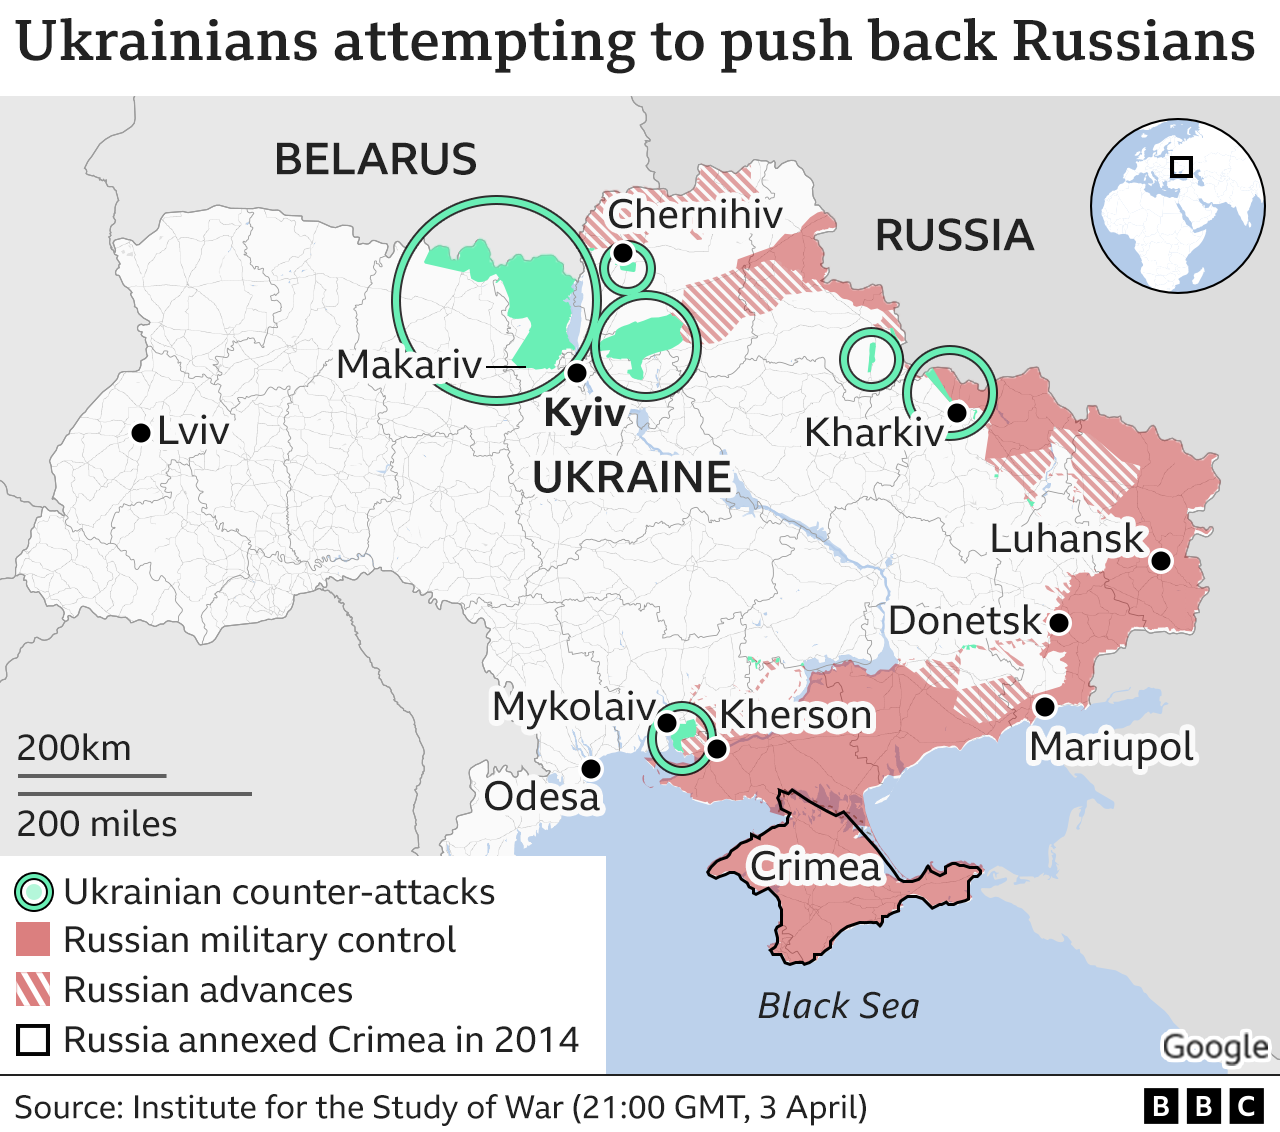 Map showing Russian advances and Ukrainian counter-attacks